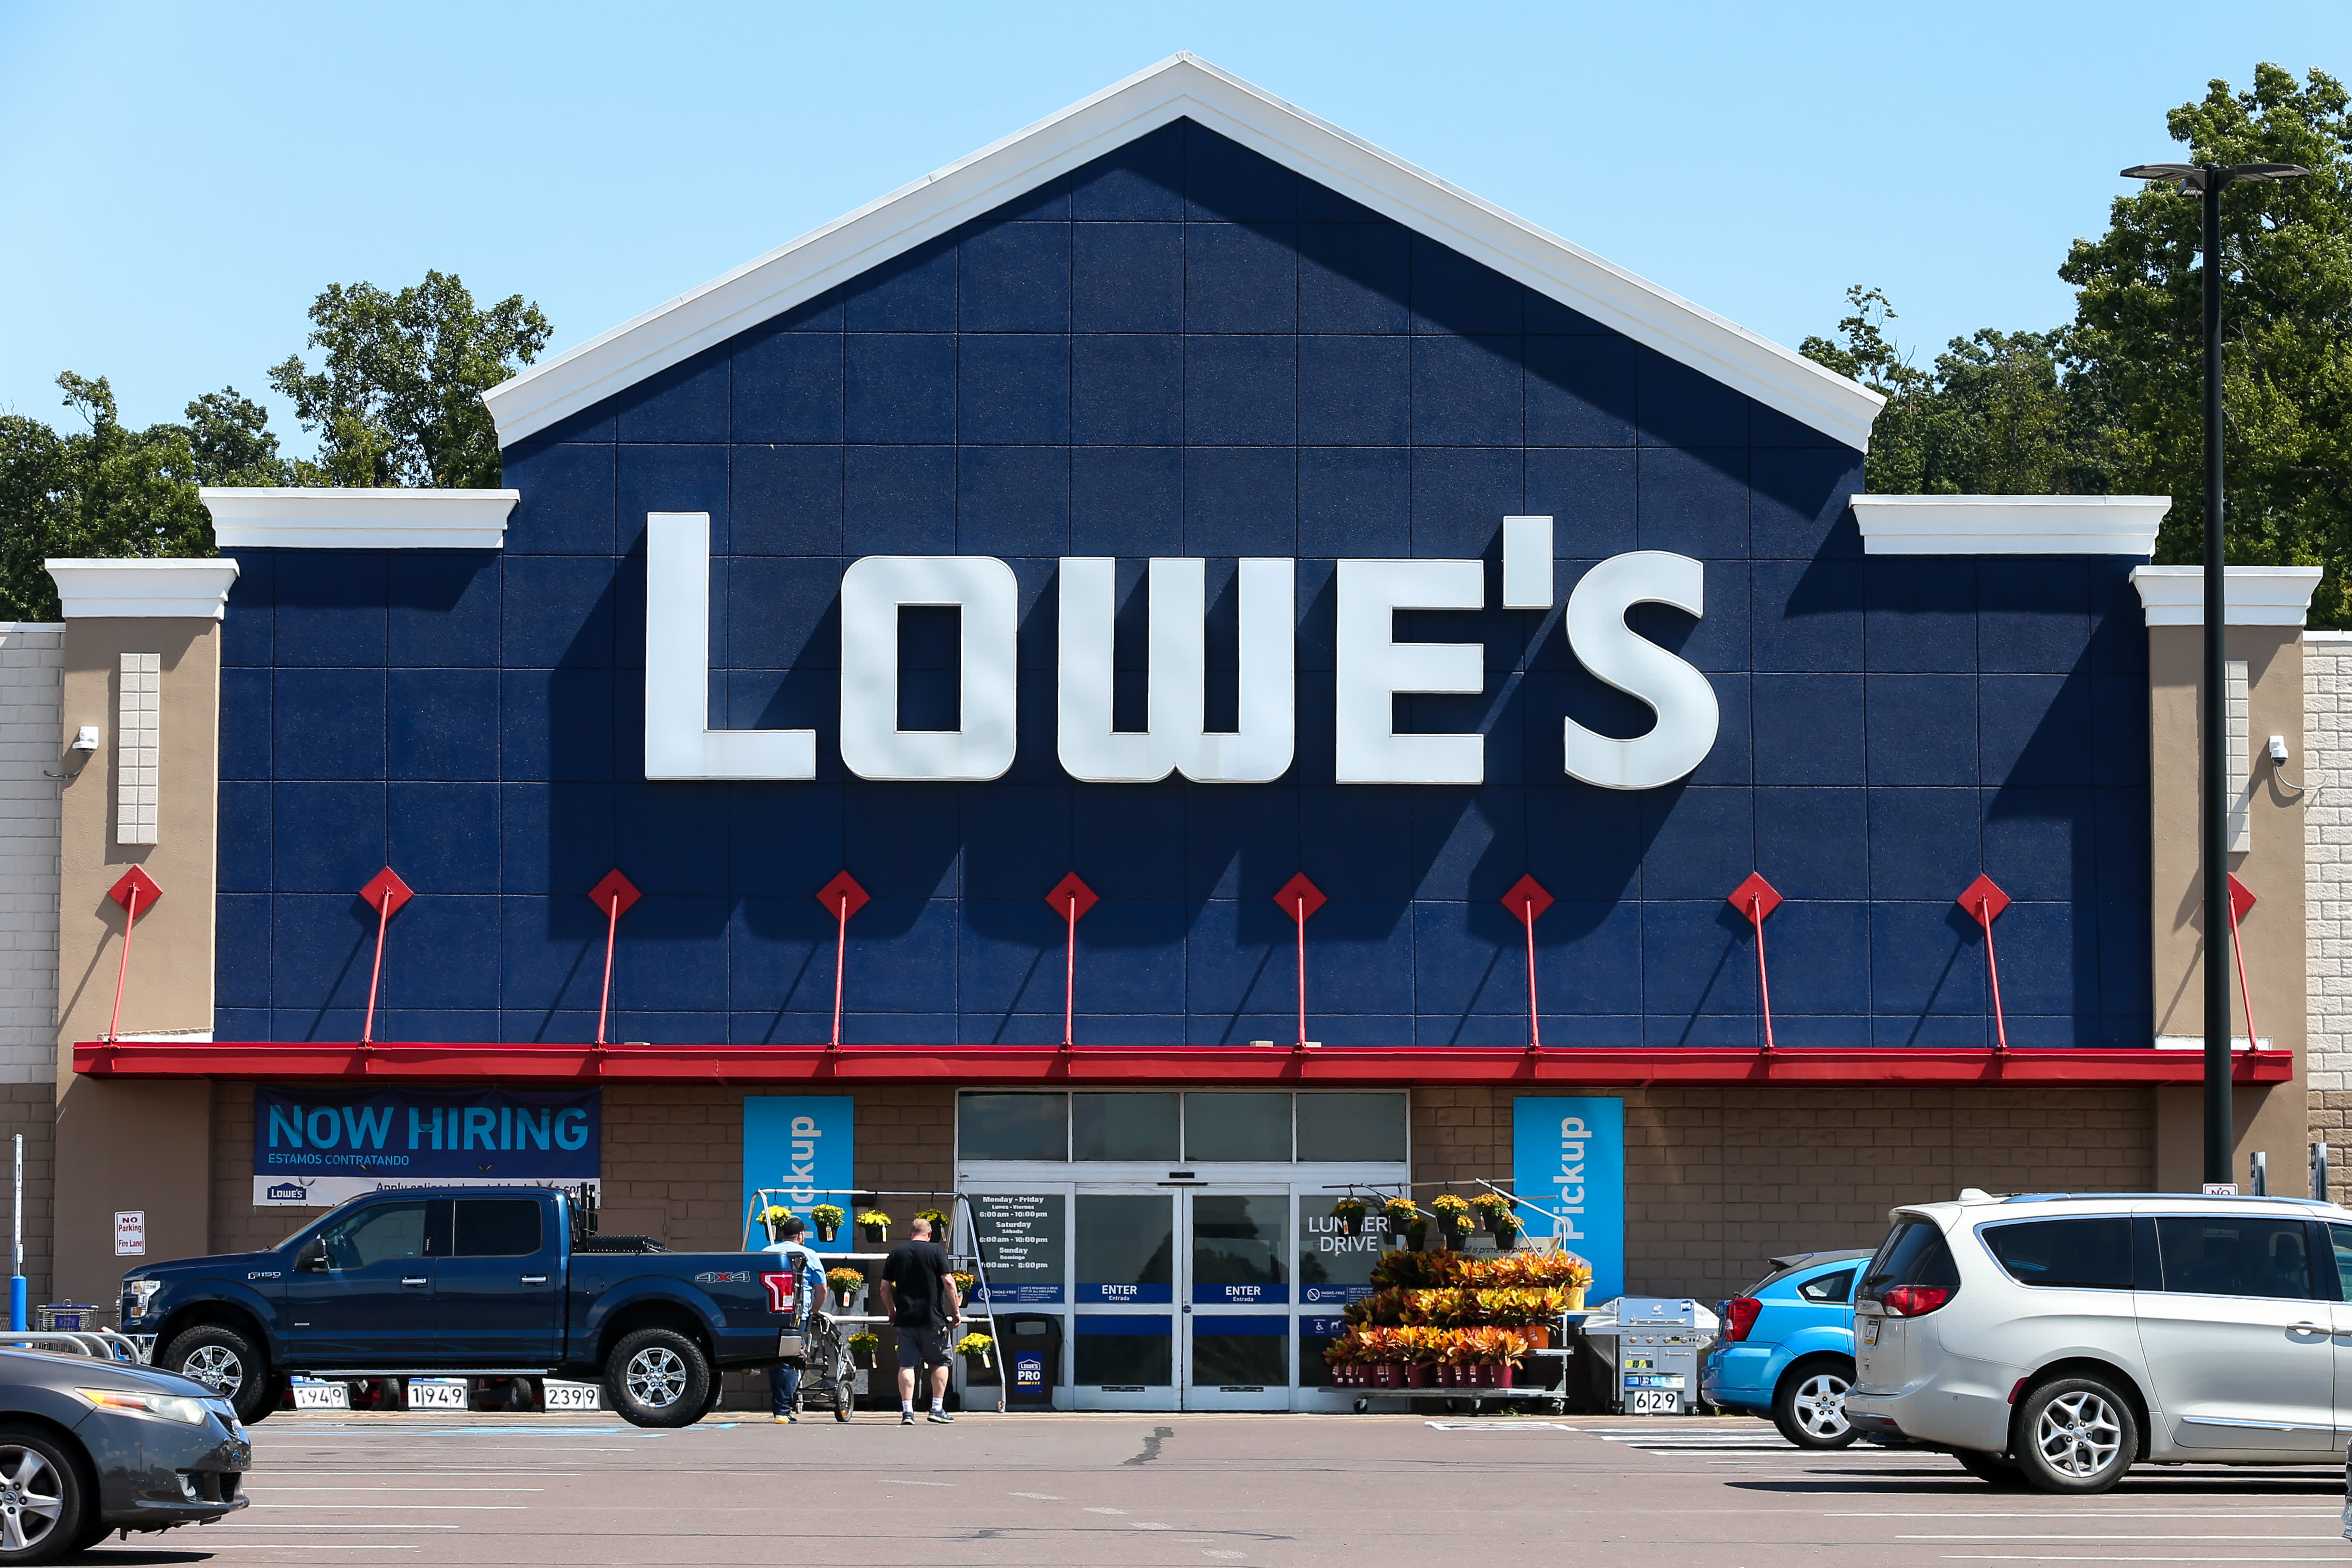 lOWESCOMSURVEY.CO IS THE NEW OFFICIAL SITE INTRODUCED BY LOWES